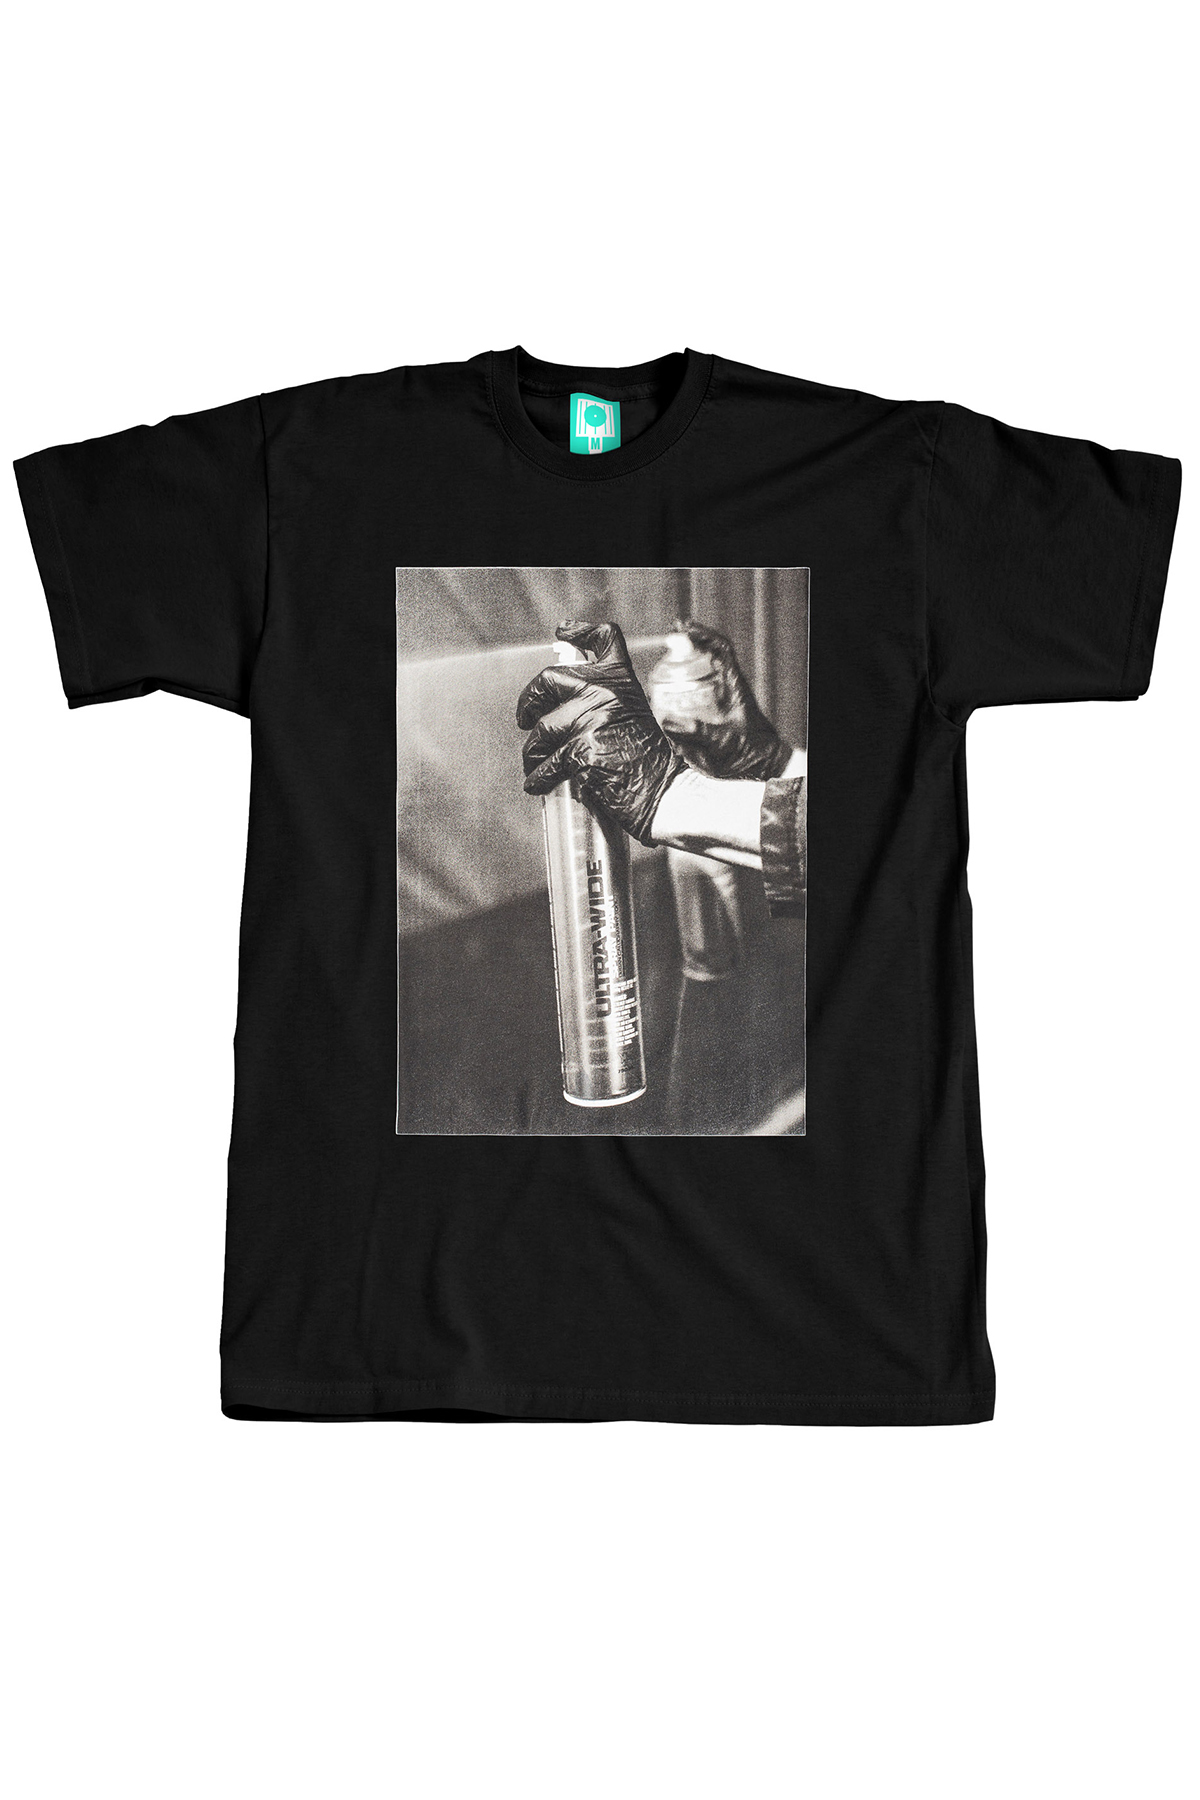 Montana ULTRA-WIDE CANS PHOTO PRINT T-Shirt by Edward Nightingale